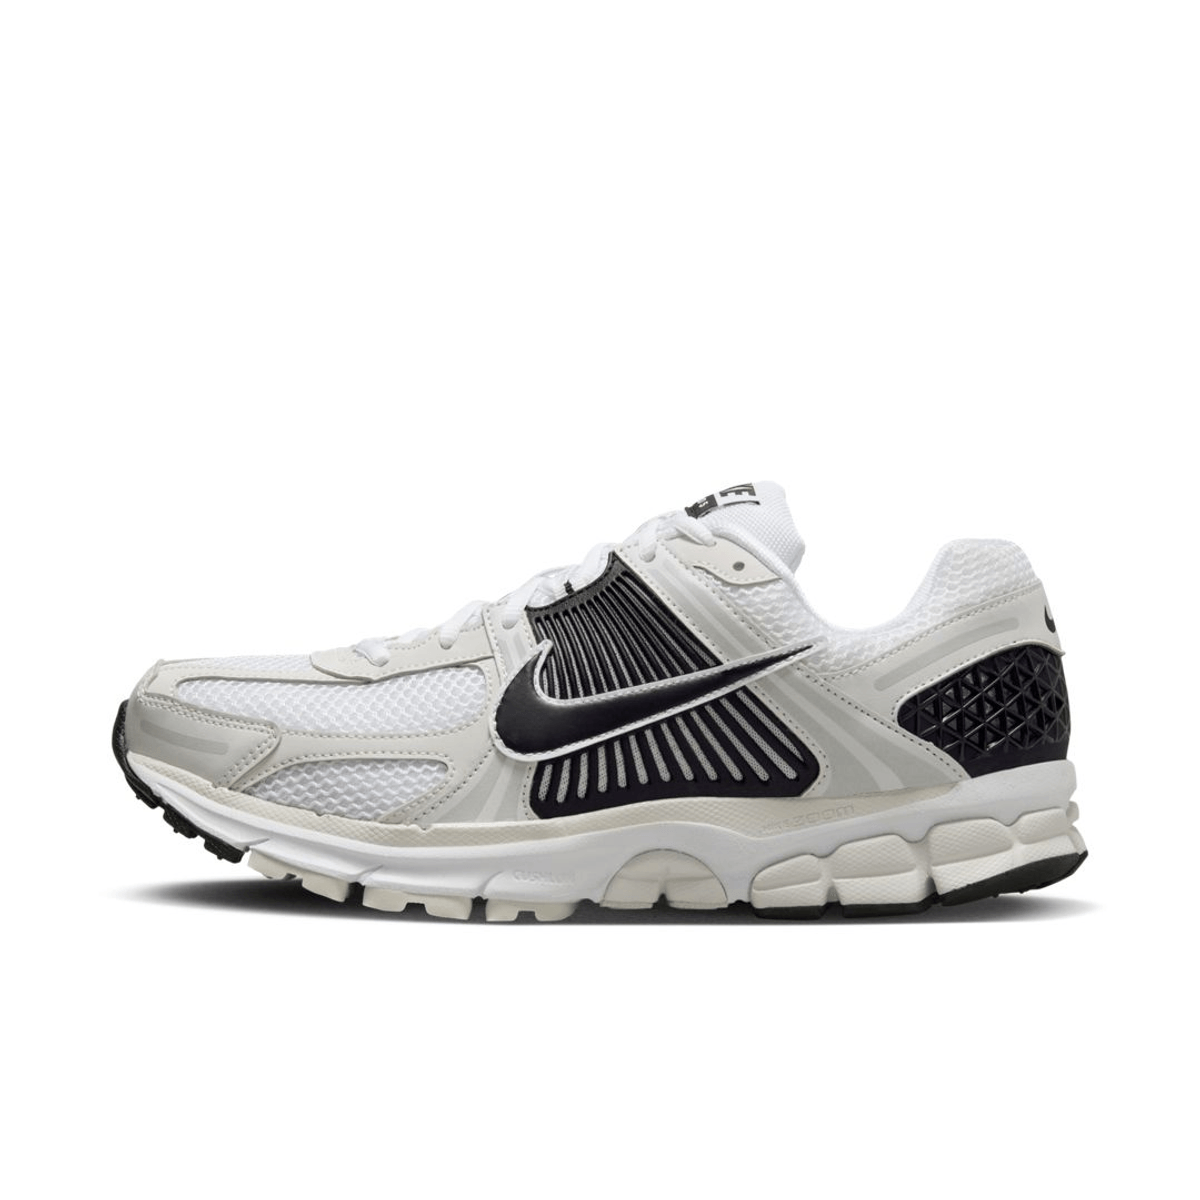 Official Look At The Nike Zoom Vomero 5 “White/Black”